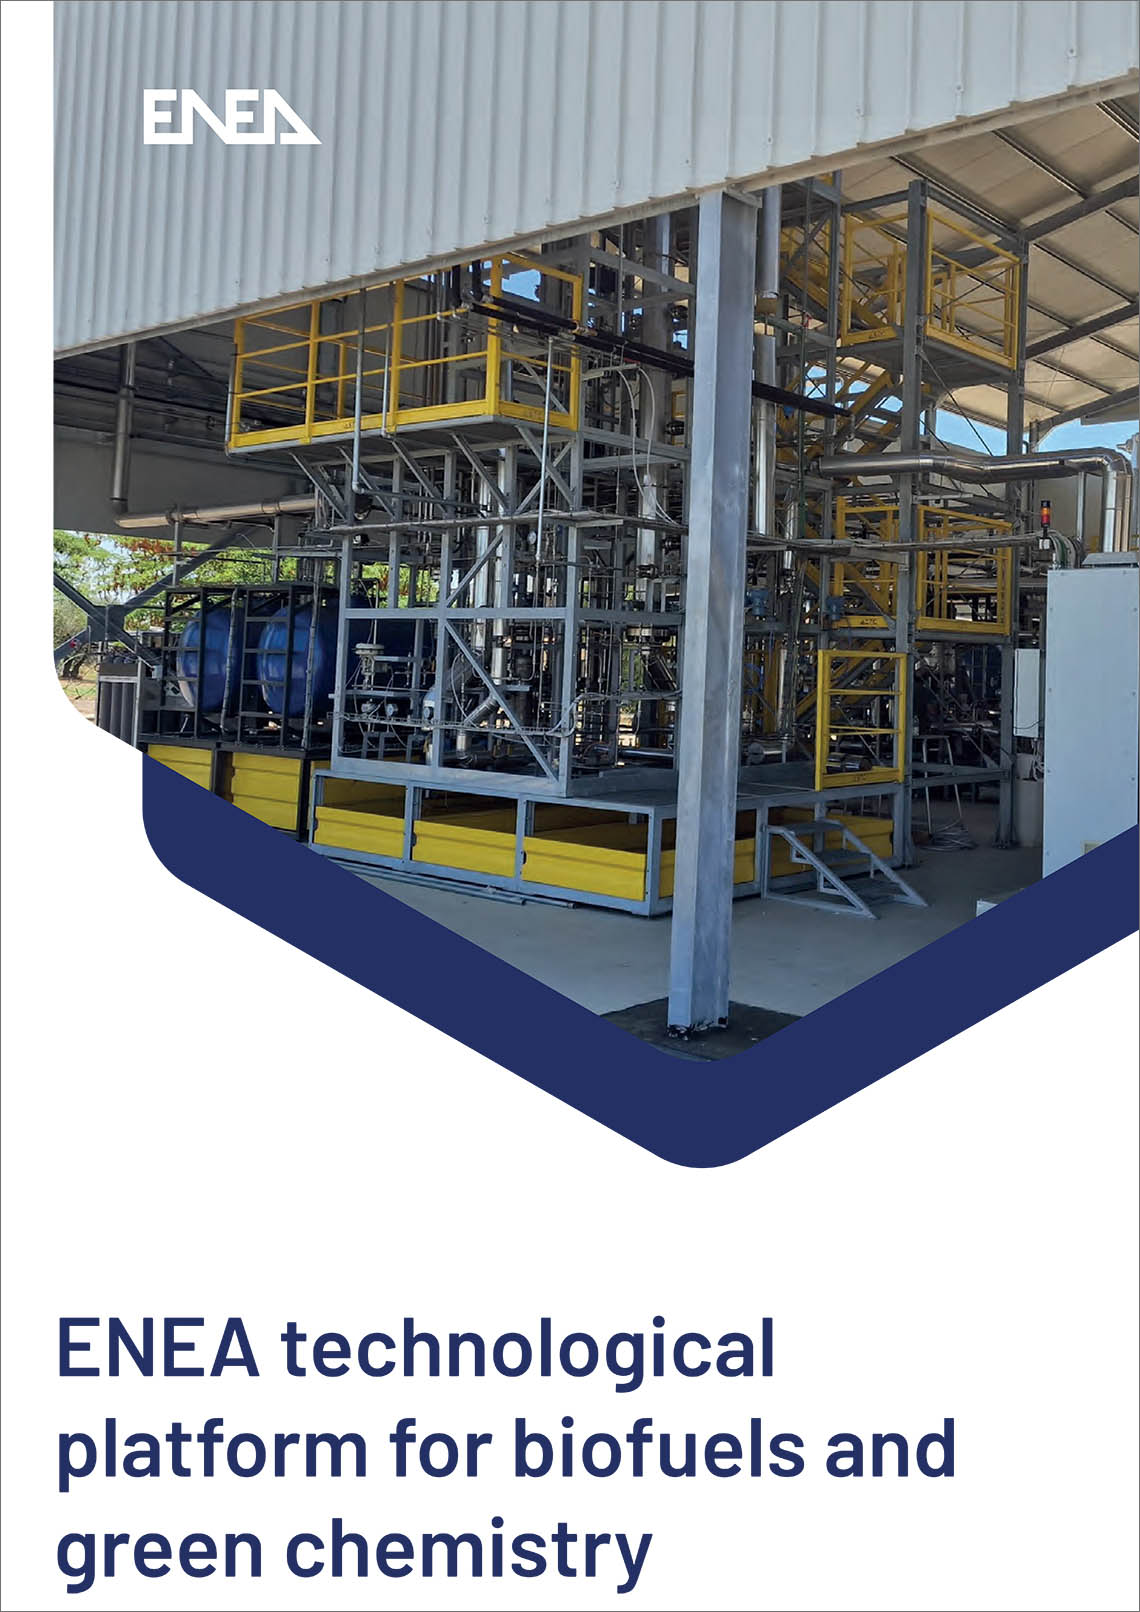 ENEA technological platform for biofuels and green chemistry